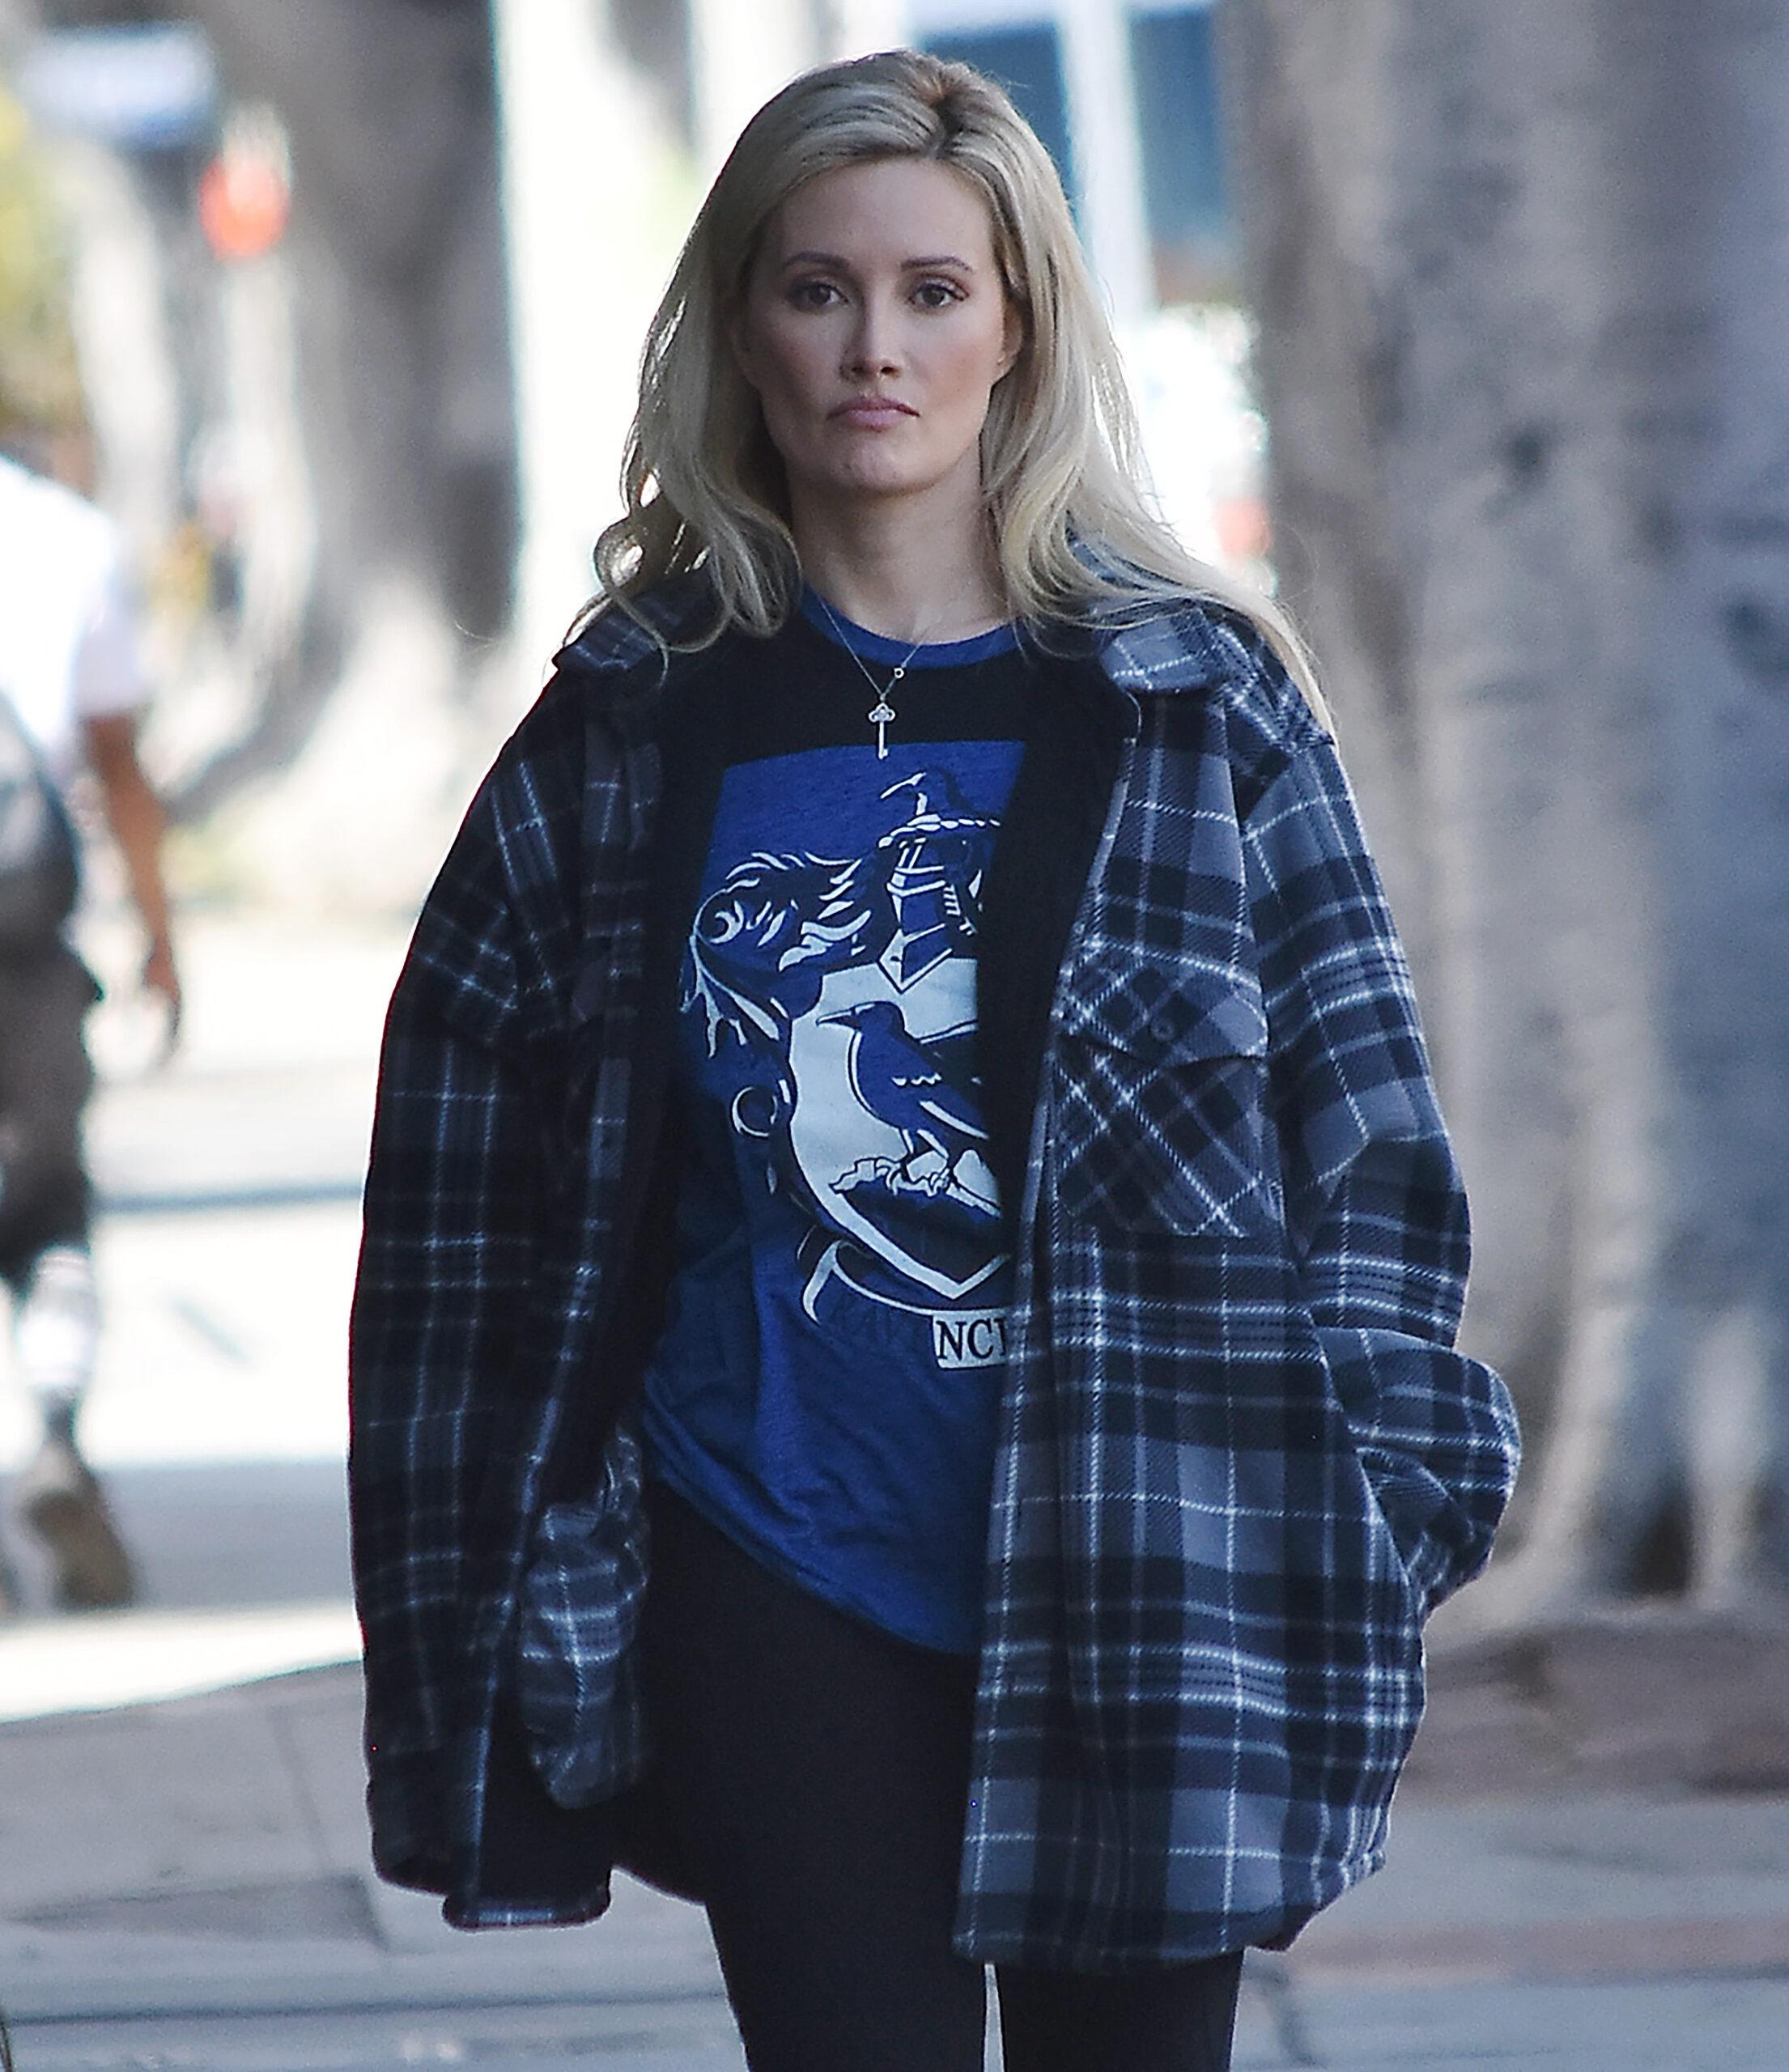 Holly Madison goes out for a walk in Studio City